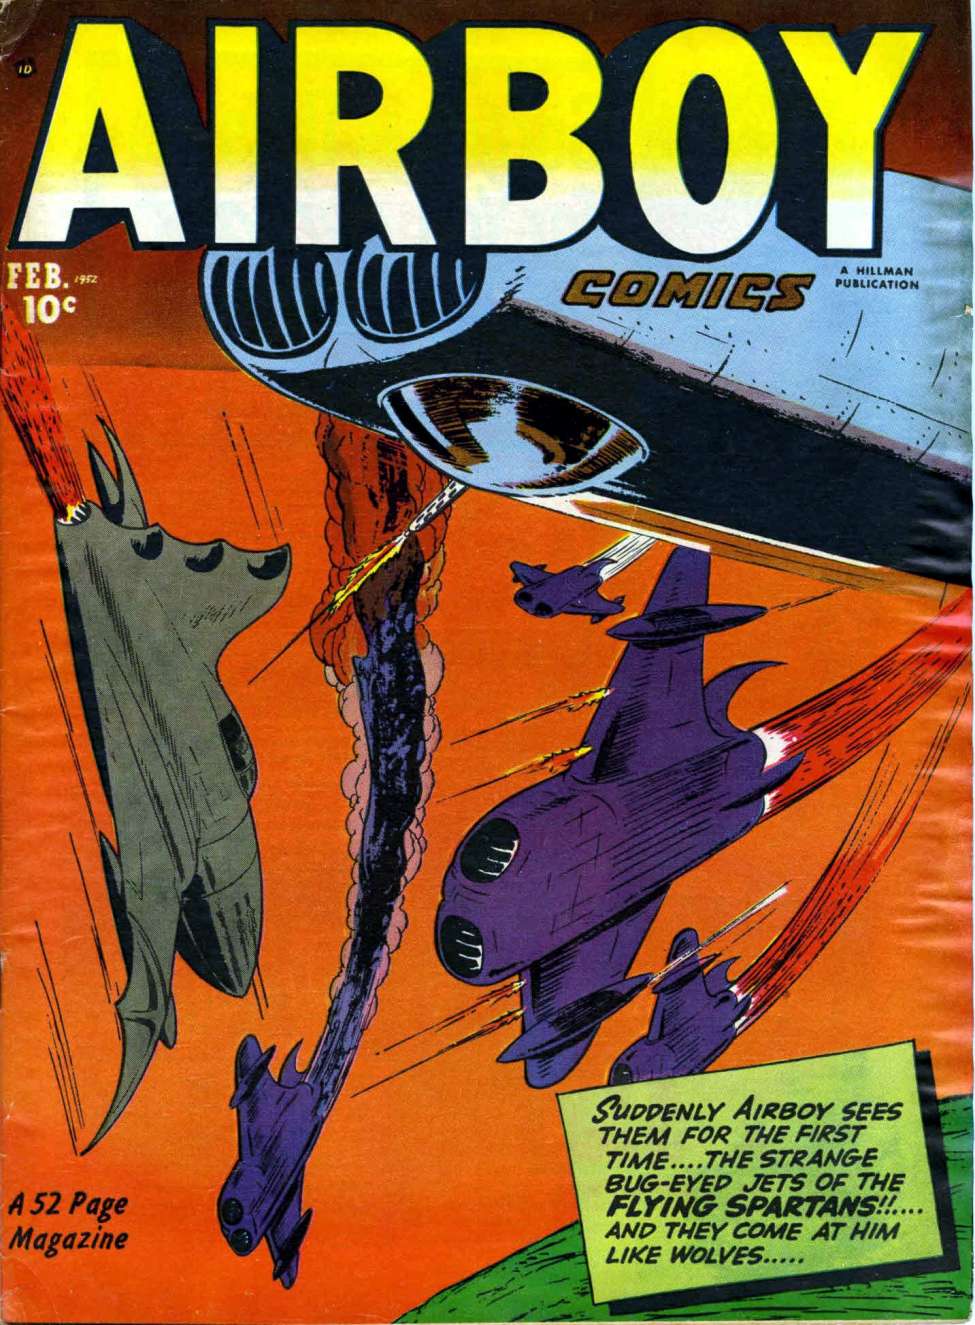 Comic Book Cover For Airboy Comics v9 1